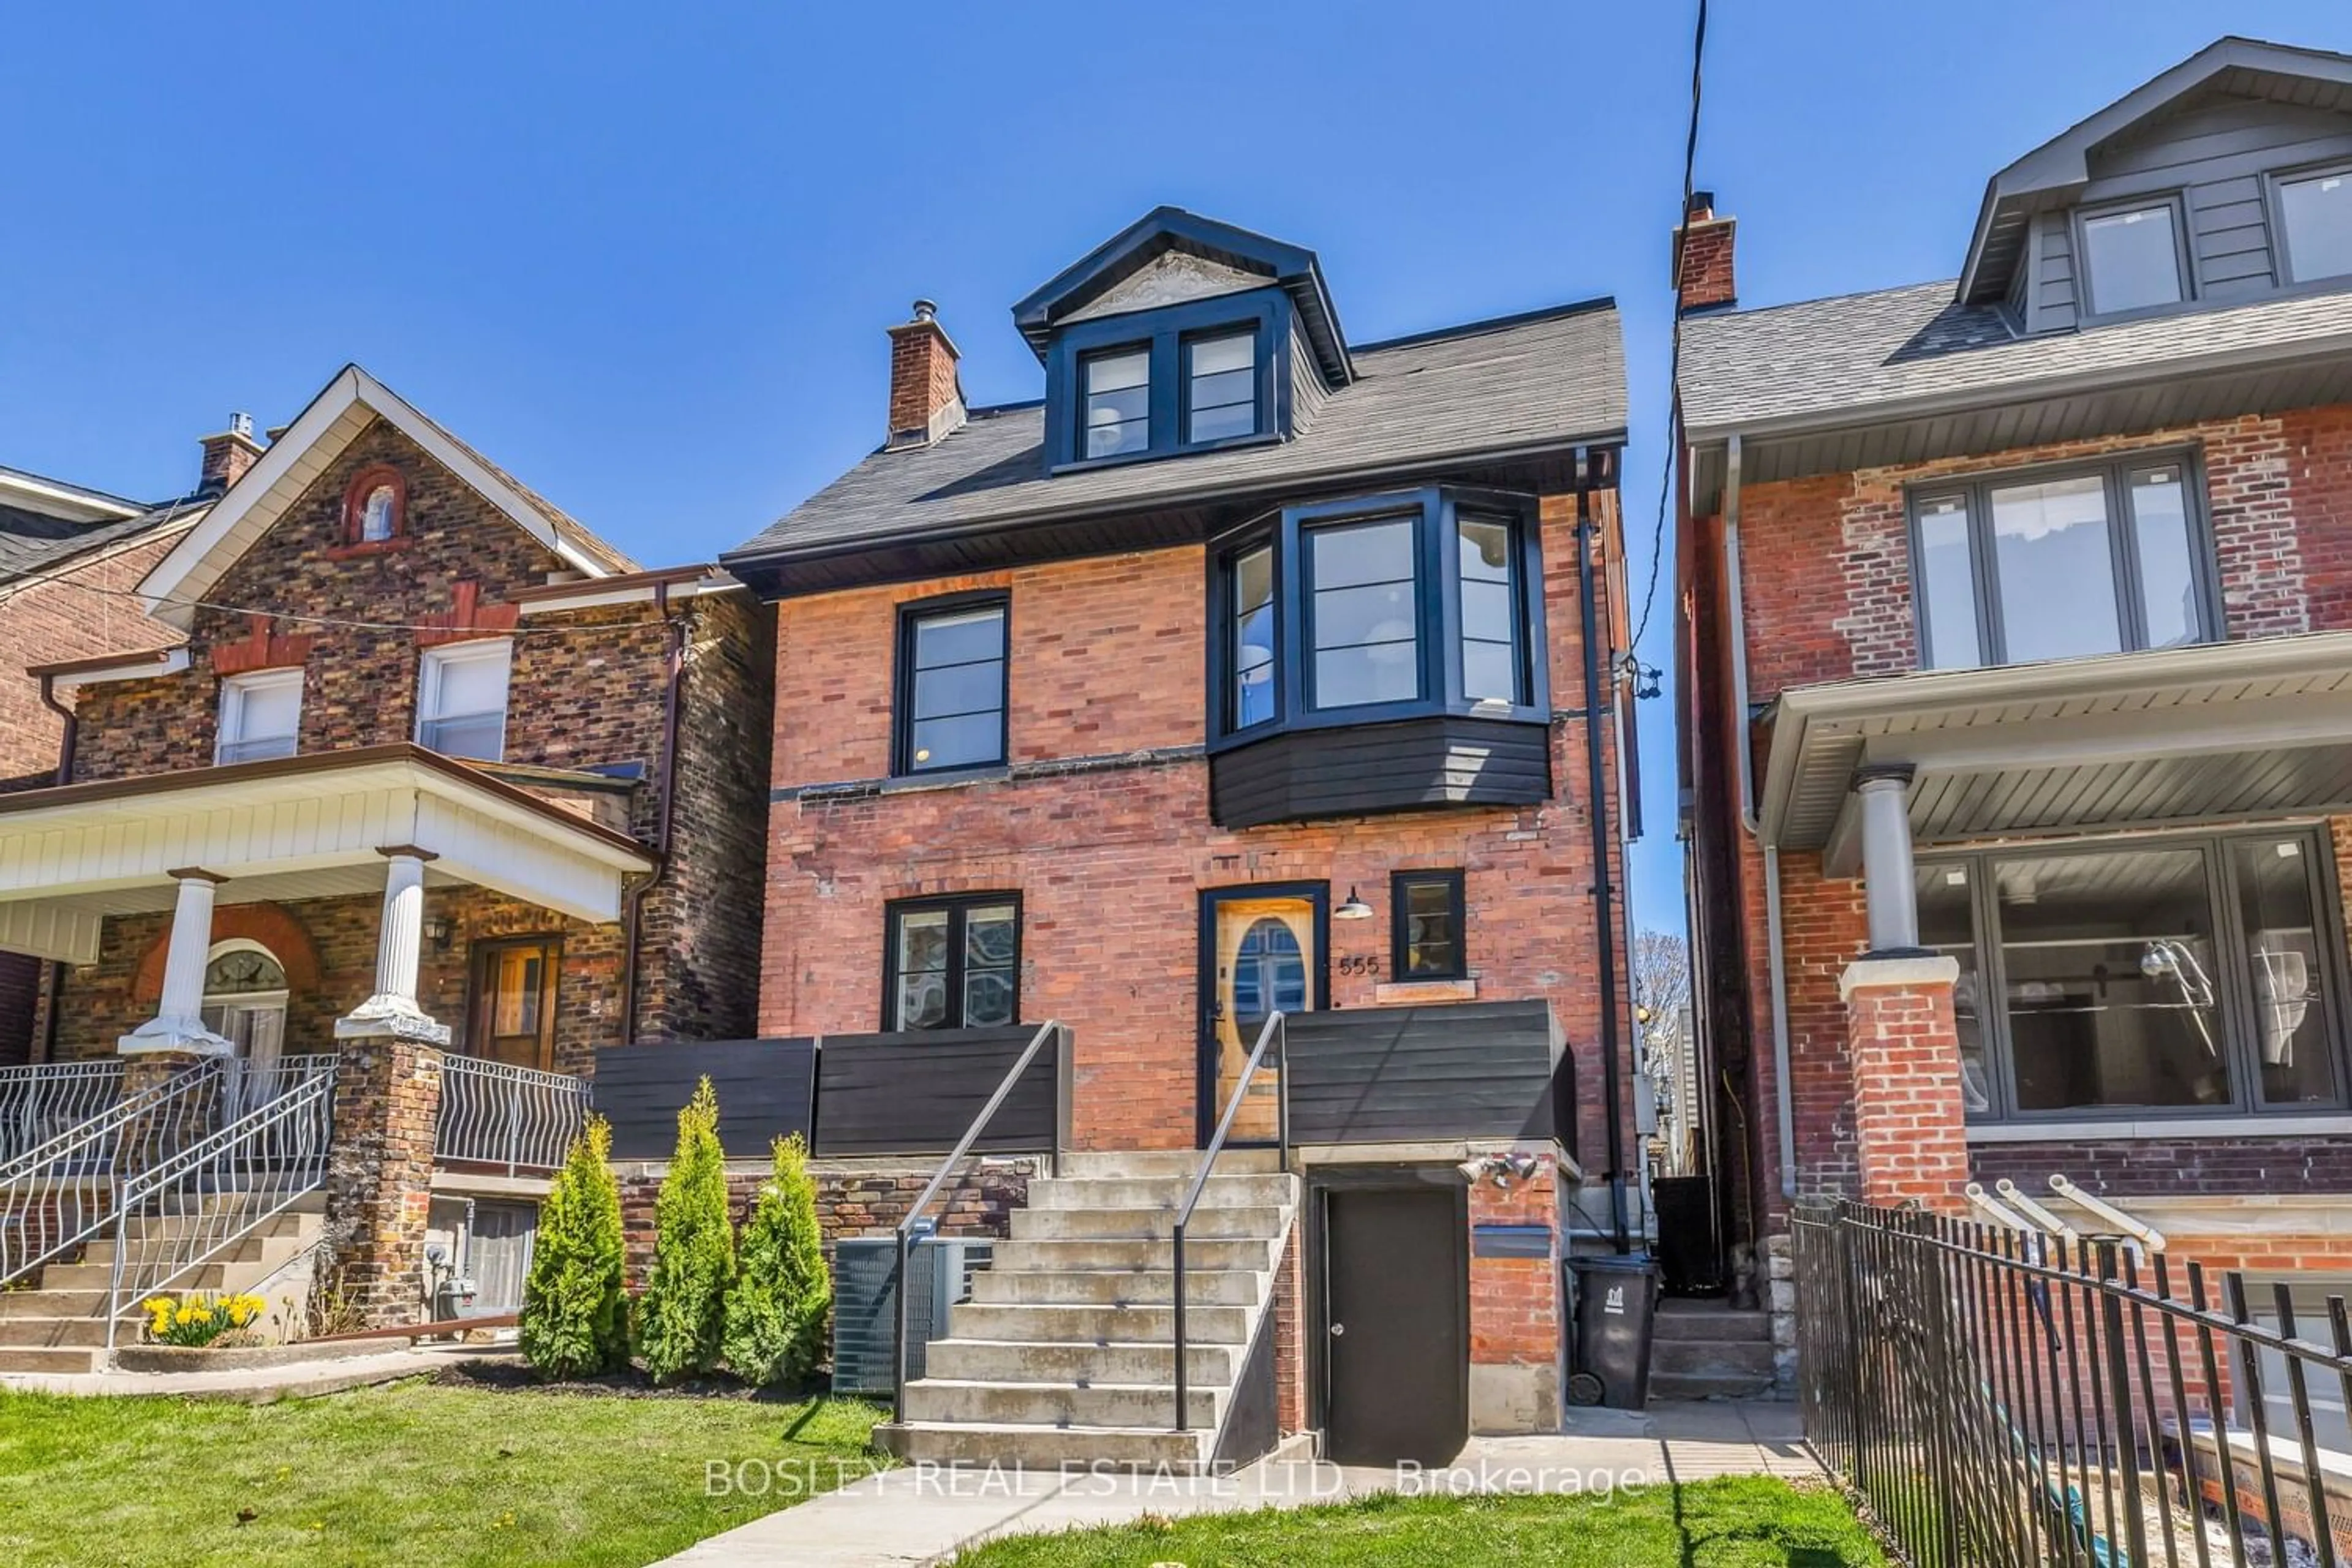 Home with brick exterior material for 555 Shaw St, Toronto Ontario M6G 3L5